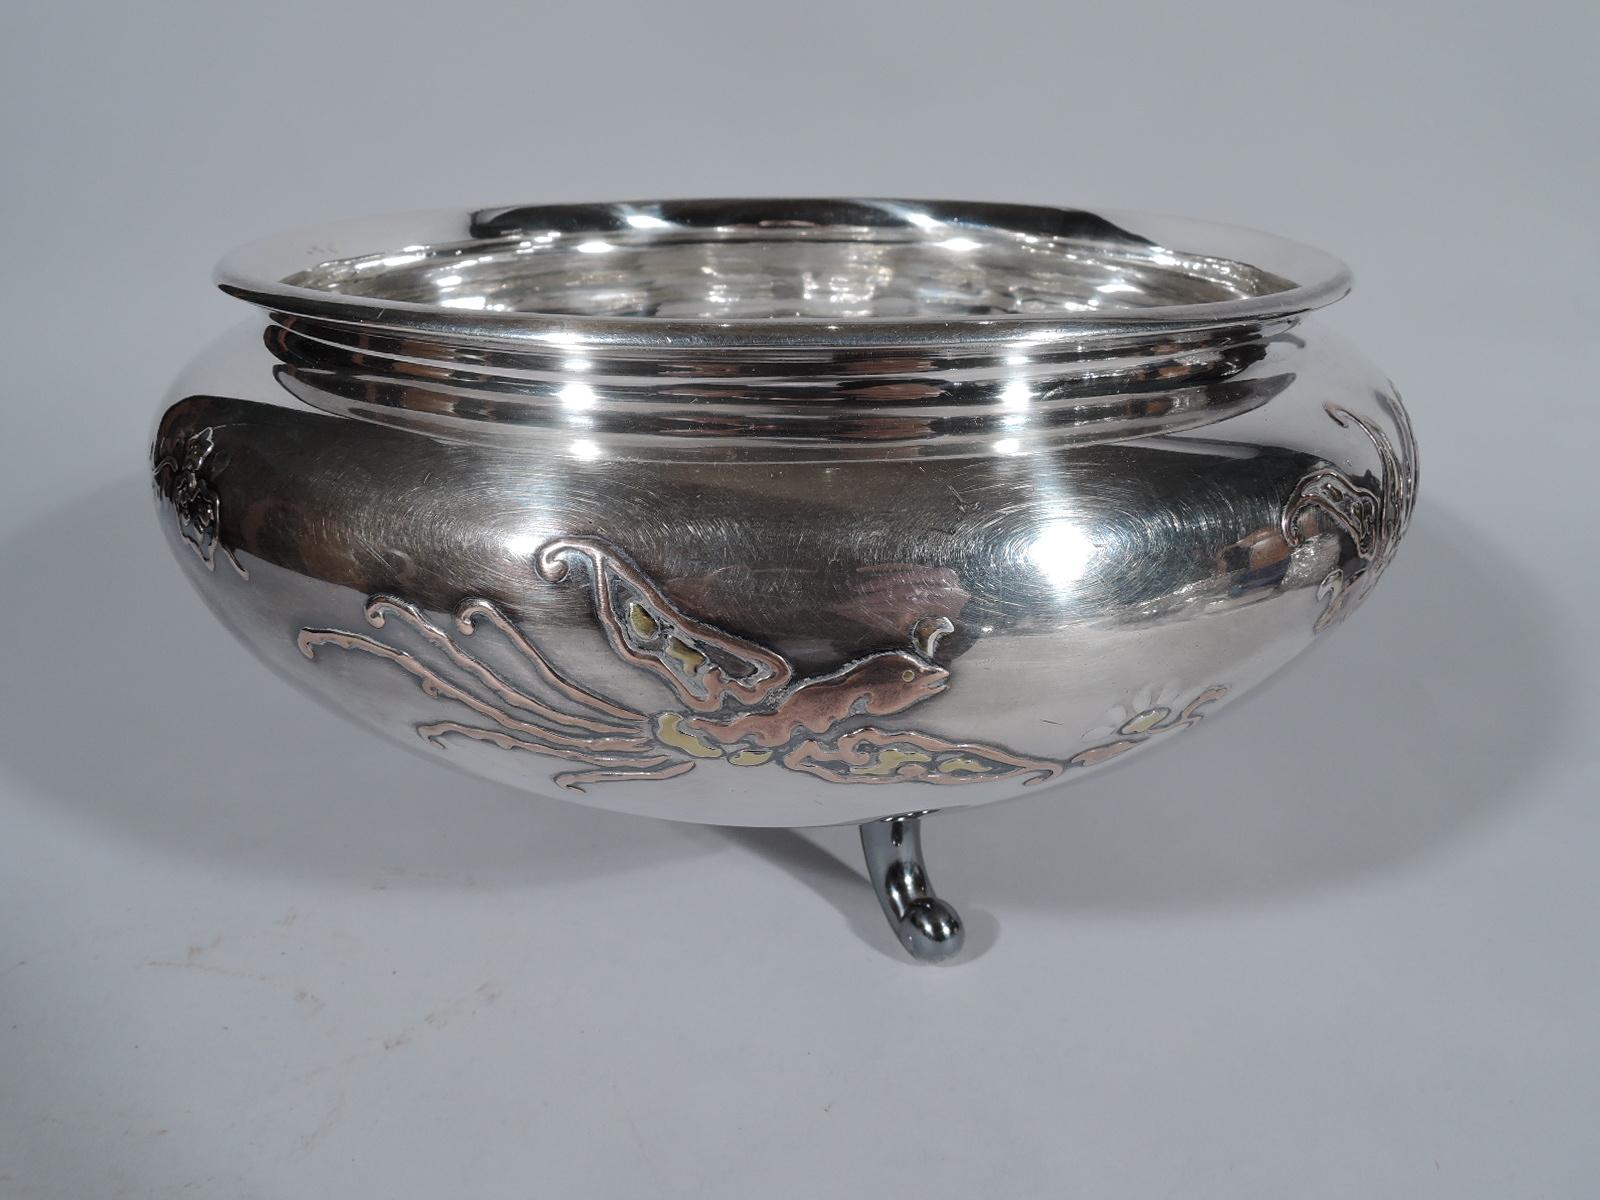 Japanese silver bowl, circa 1890. Bellied with applied gold, copper, and silver flowers and birds. Ornament fluid and stylized. Three C-scroll supports with shaped and tooled cloud mounts. Marked. Heavy weight: 42.5 troy ounces.